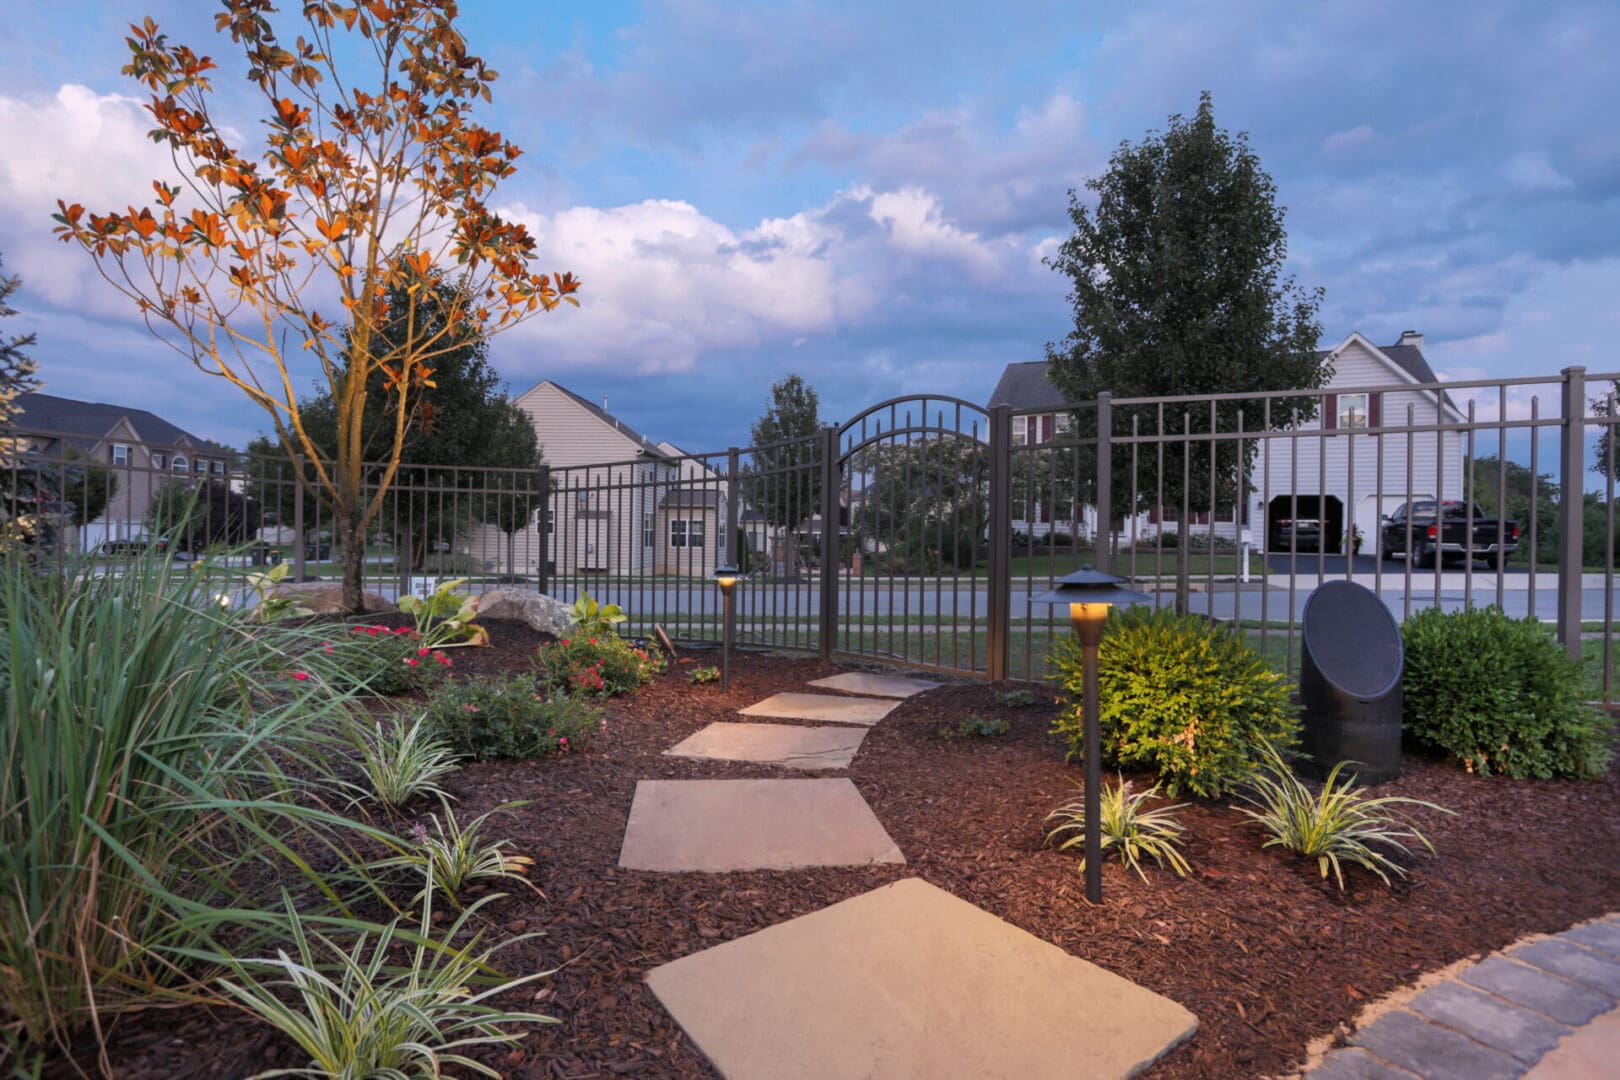 A pathway illuminated with outdoor lighting, leading to a serene garden in a residential neighborhood.